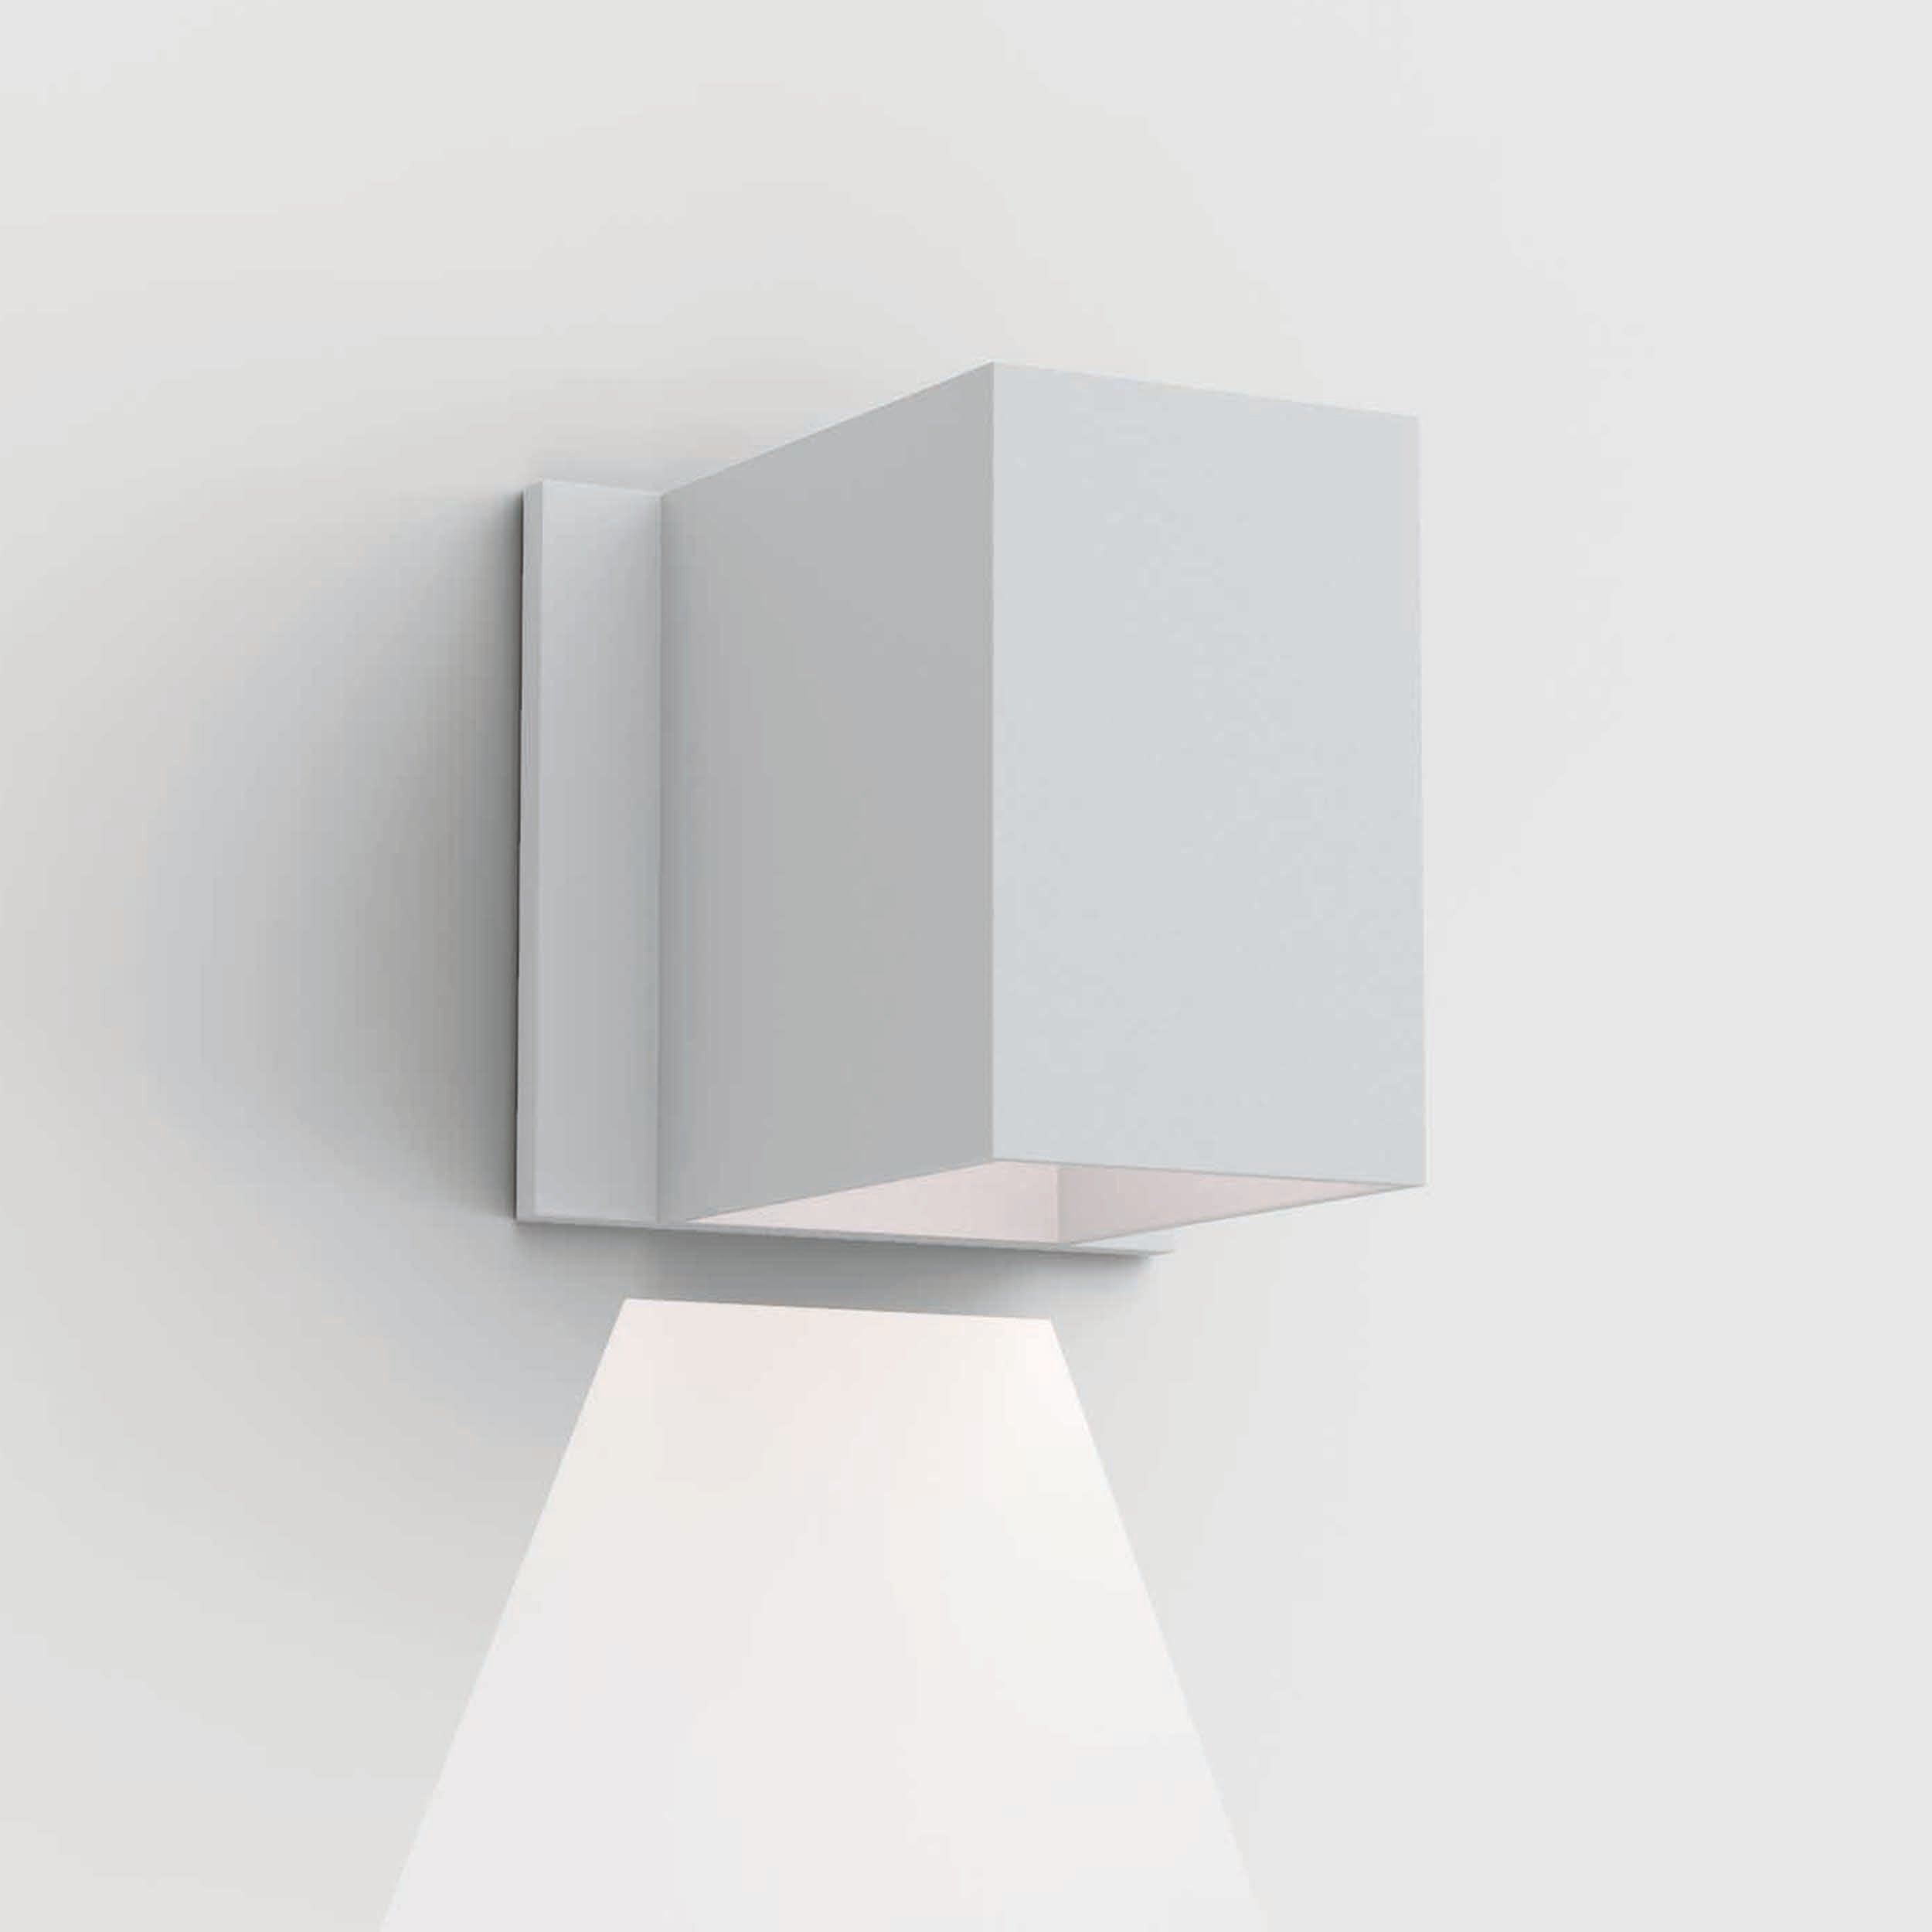 Astro Lighting Oslo Wall Light Fixtures Astro Lighting 4.17x4.33x4.33 Textured White Yes (Integral), High Power LED